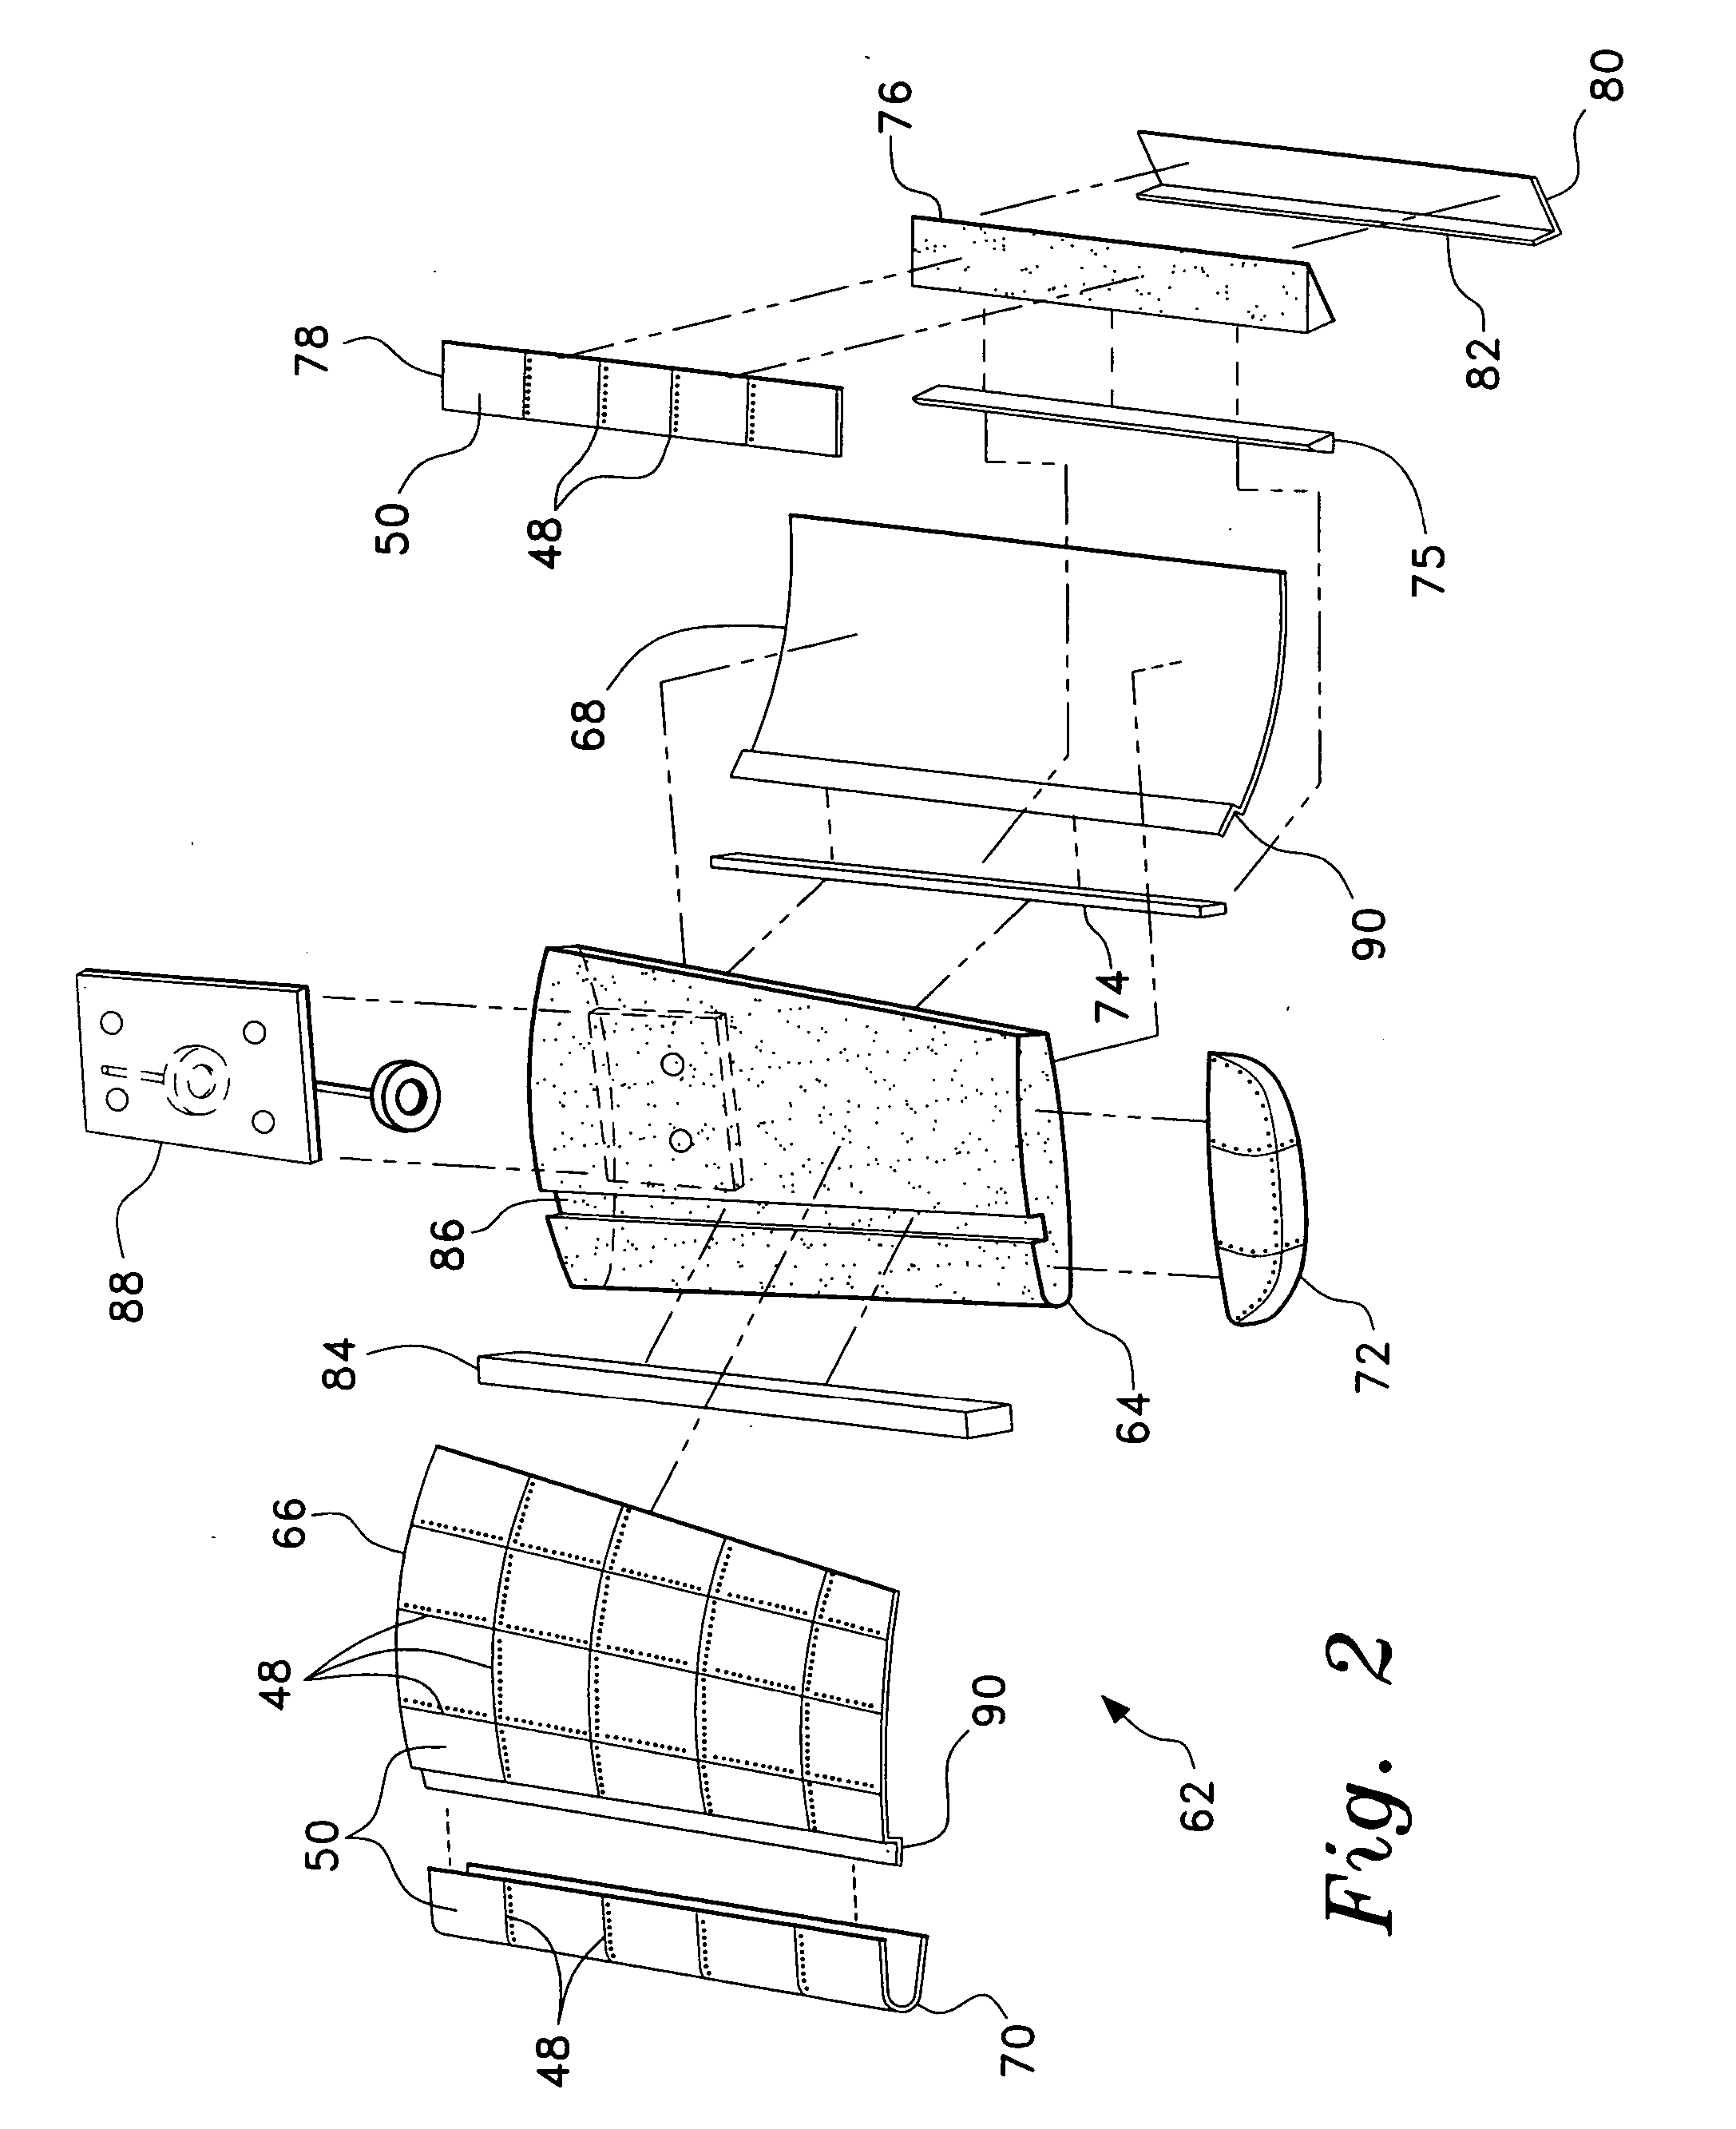 Composite model construction and method